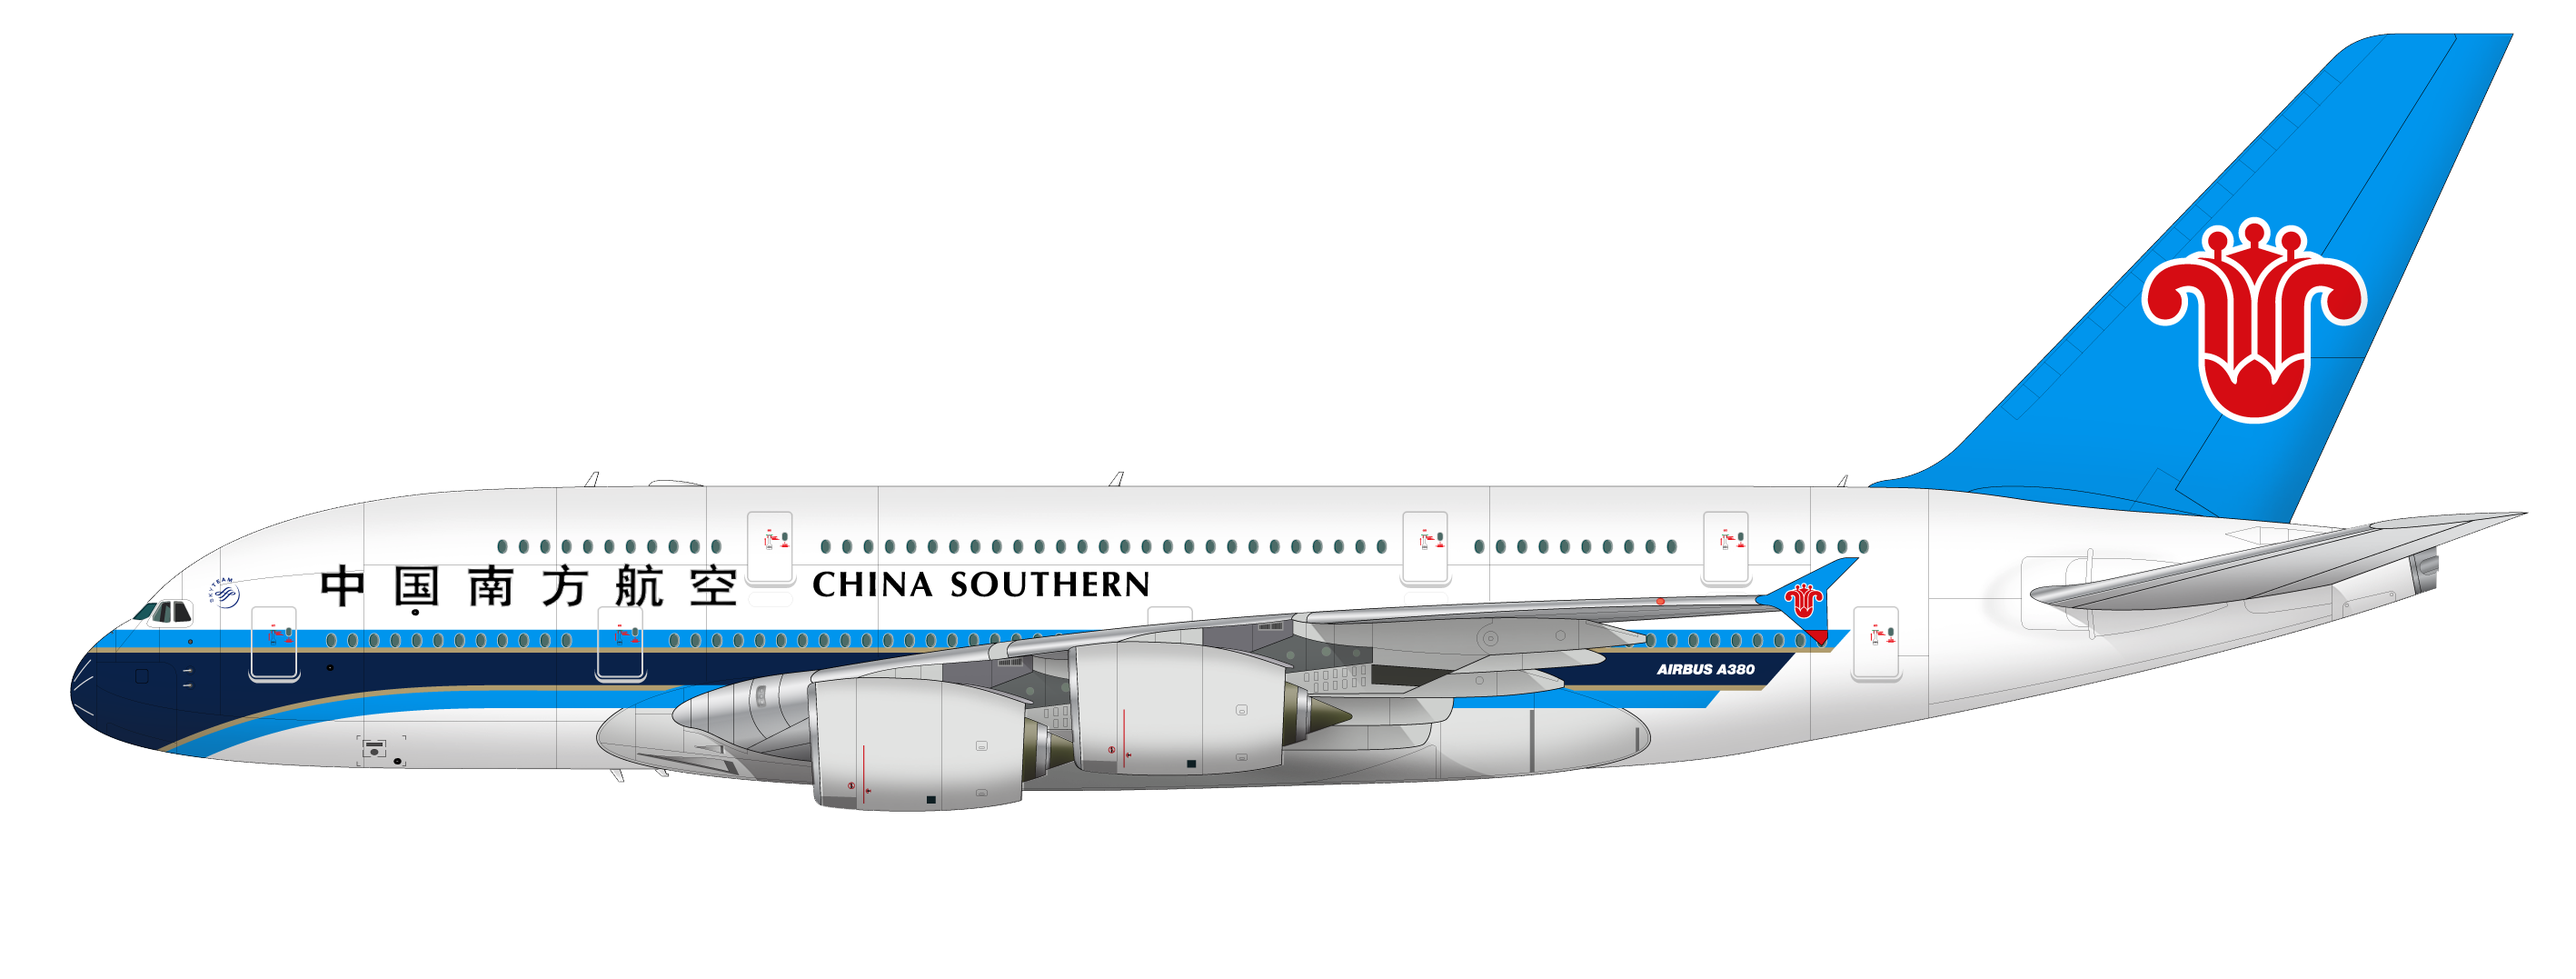 China Southern Airlines Boeing 787 B 2725 Msn